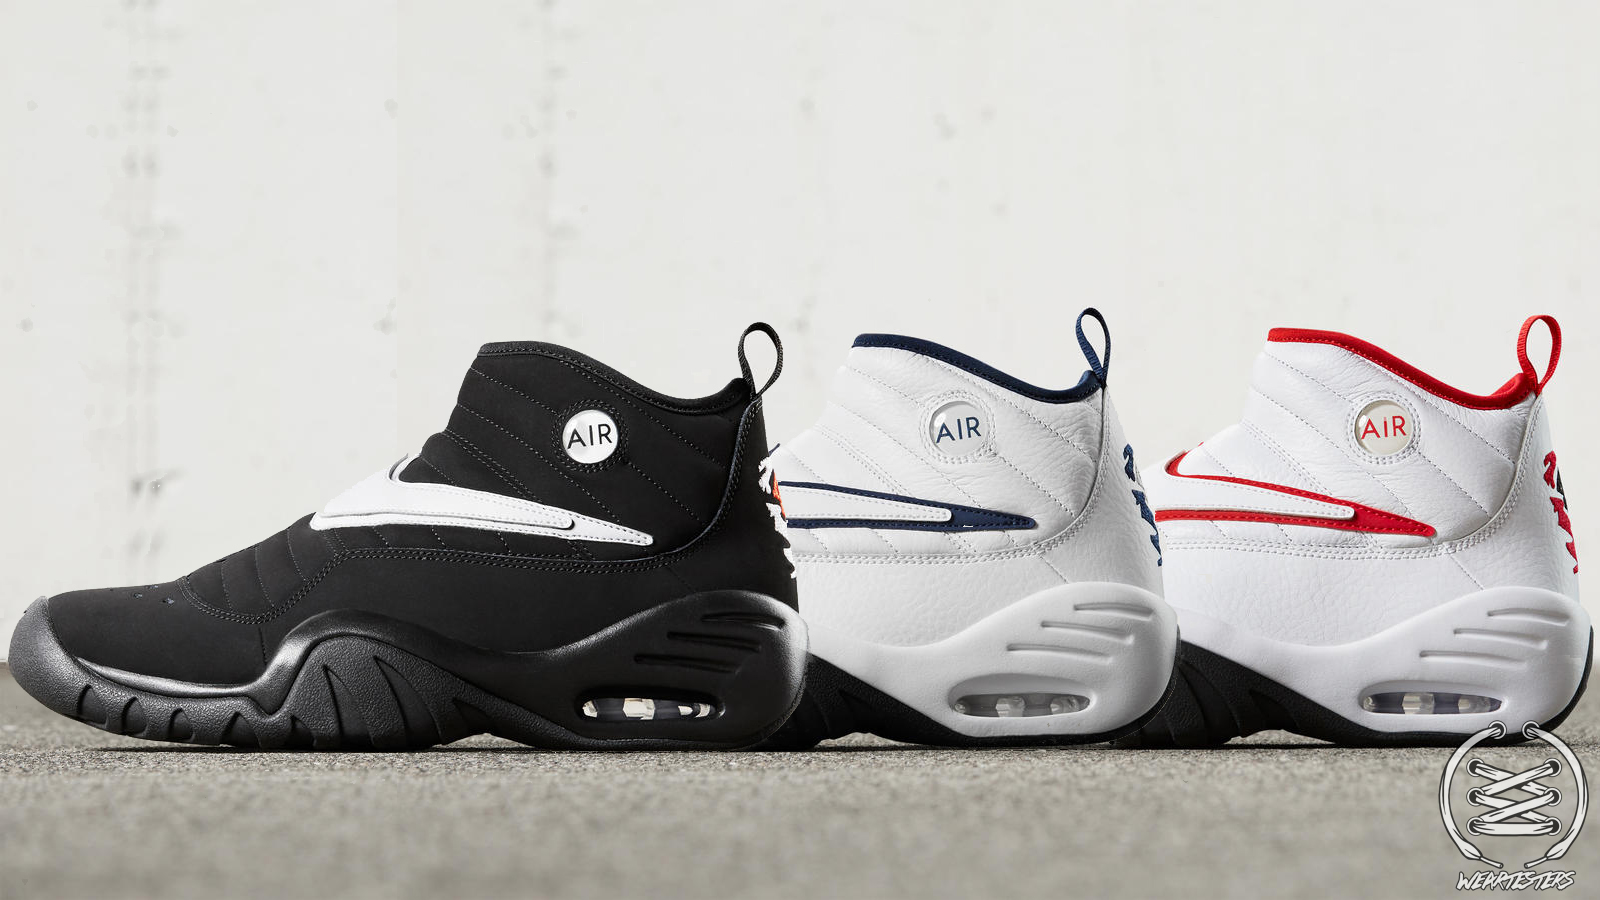 An Official Look at All Three Nike Air Shake NDestrukt Colorways